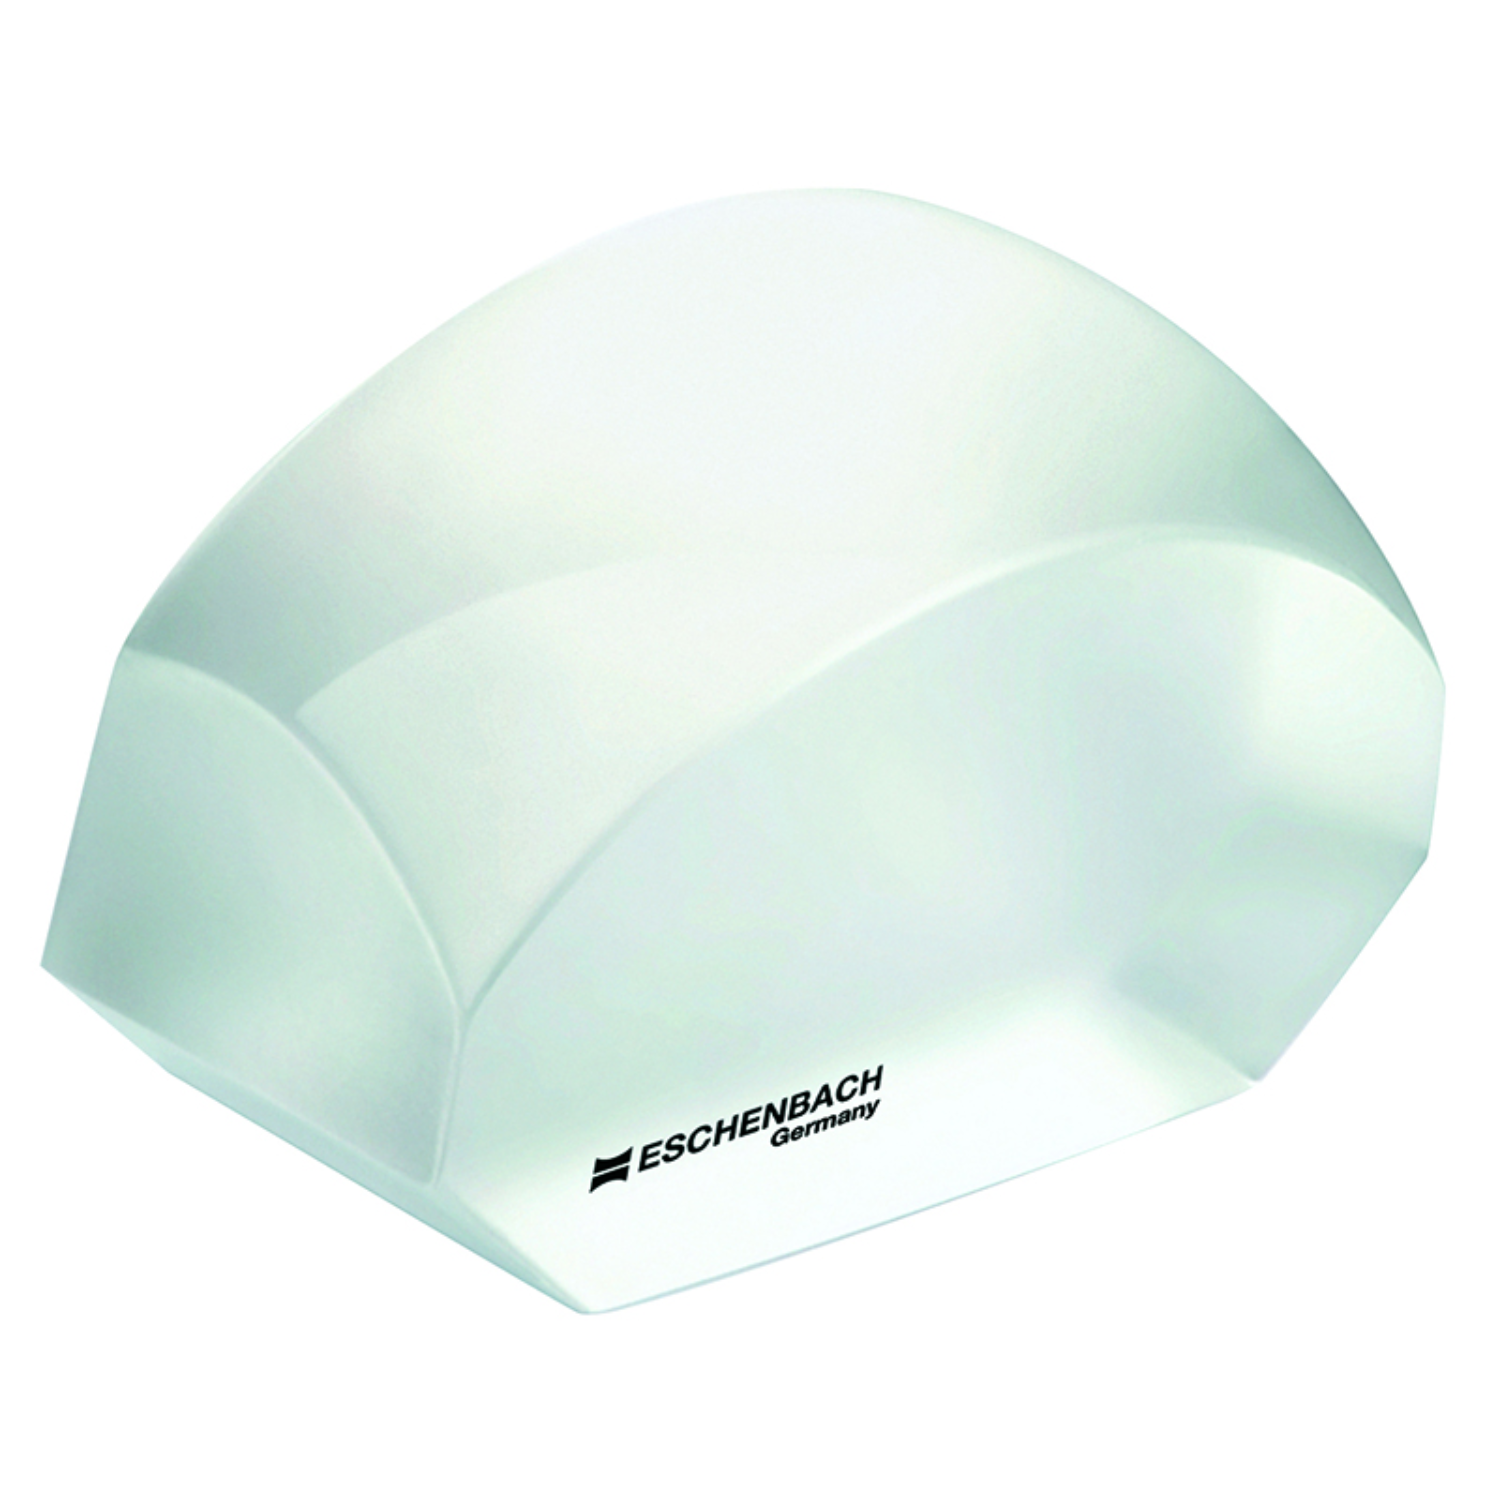 Image of the 1.8x MakroPLUS dome magnifier from Eschenbach.